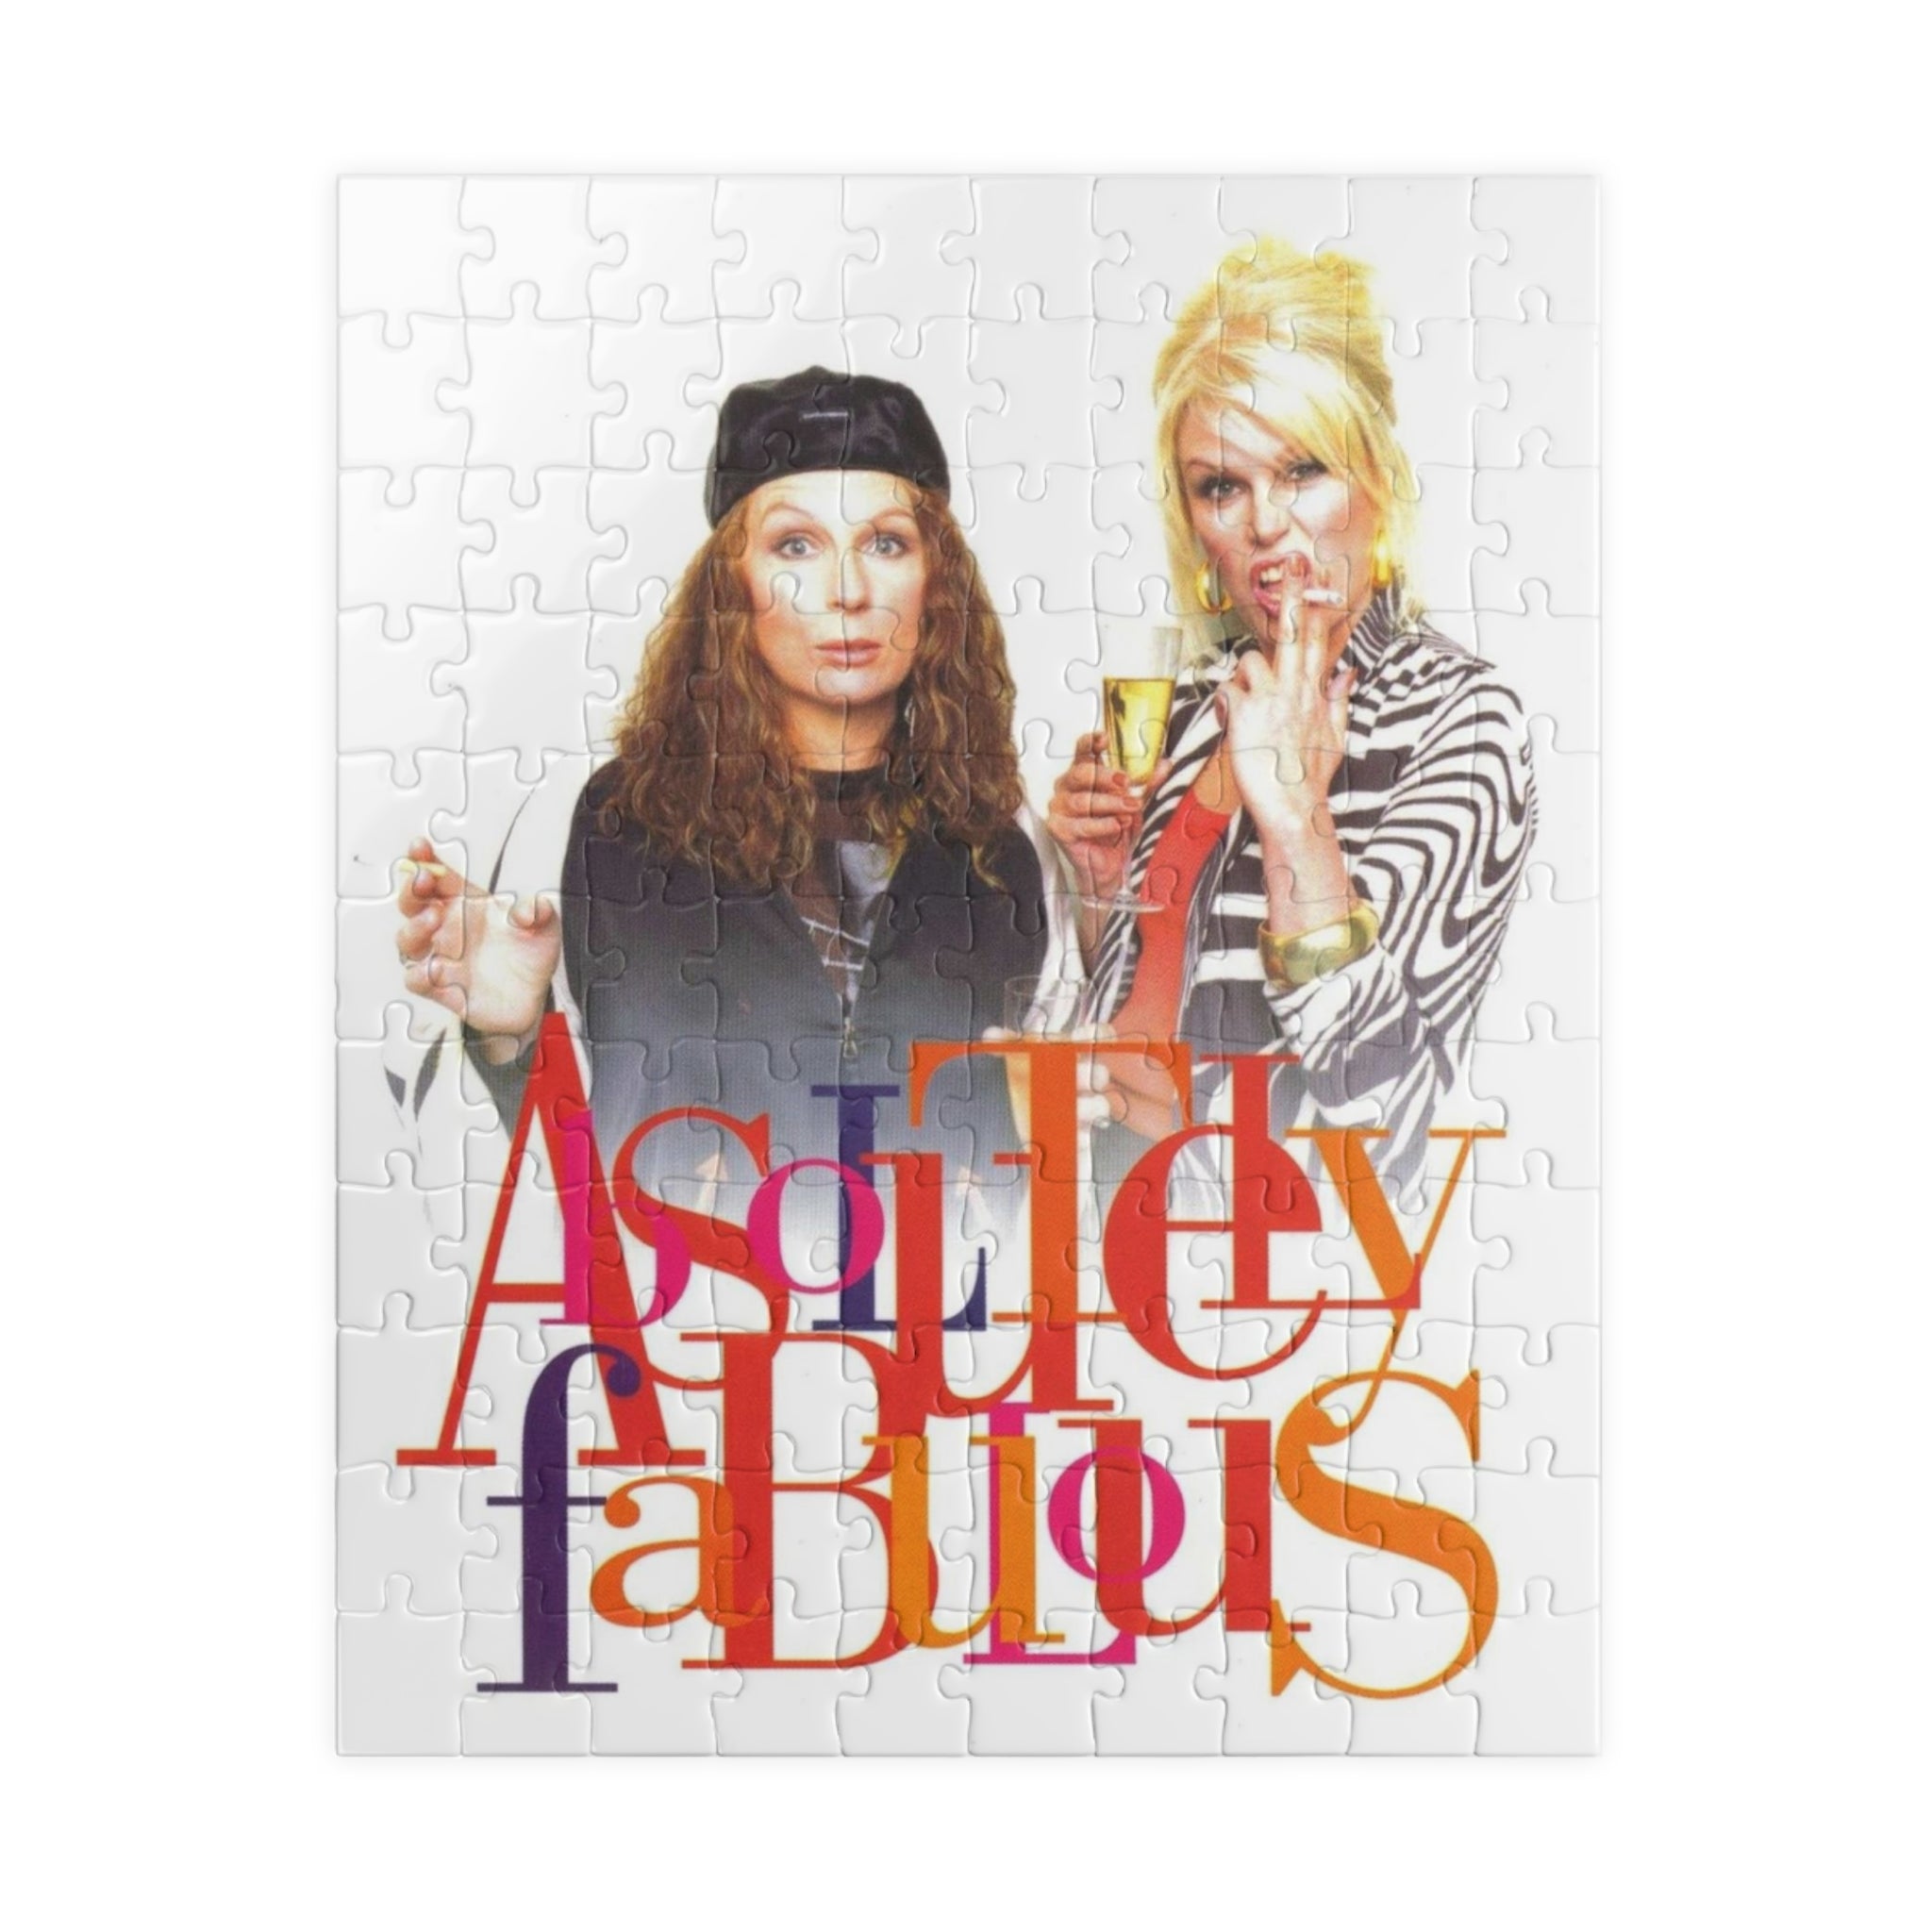 https://creationsbychrisandcarlos.store/products/absolutely-fabulous-puzzle-110-252-520-1014-piece